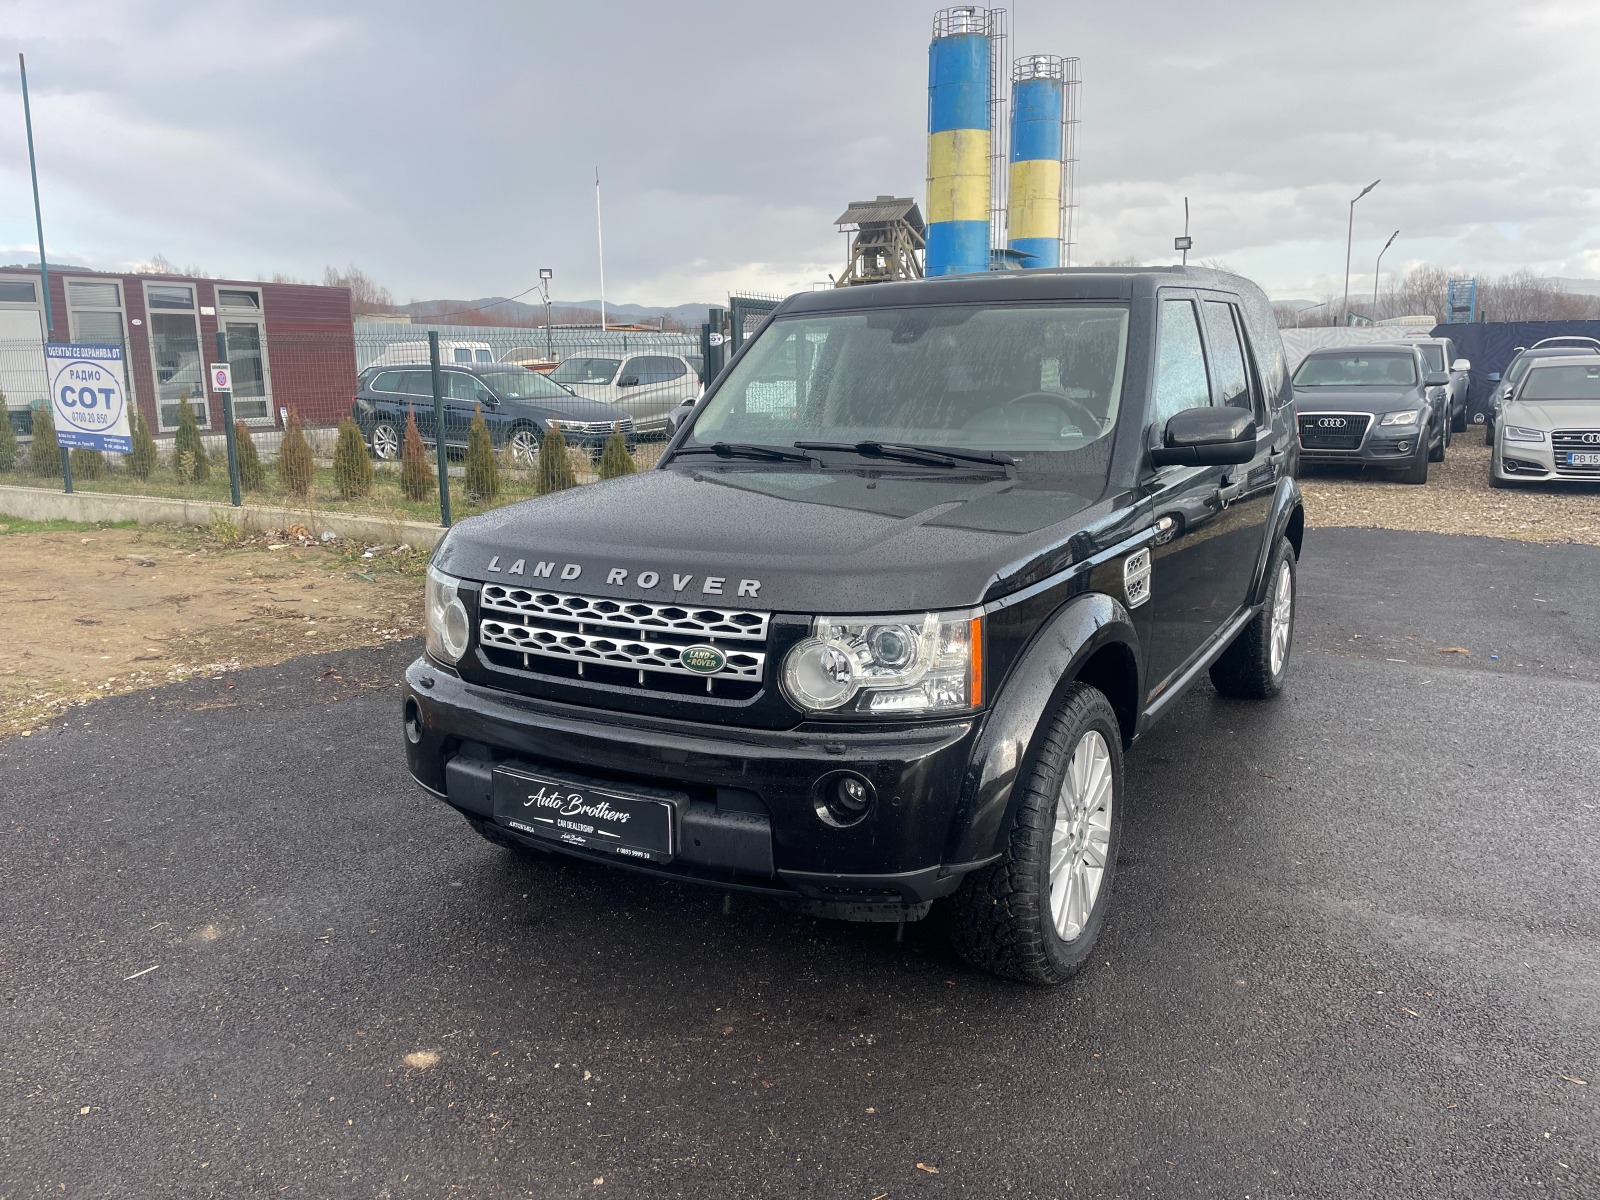 Land Rover Discovery 4 SDV6 3.0 HSE - изображение 1